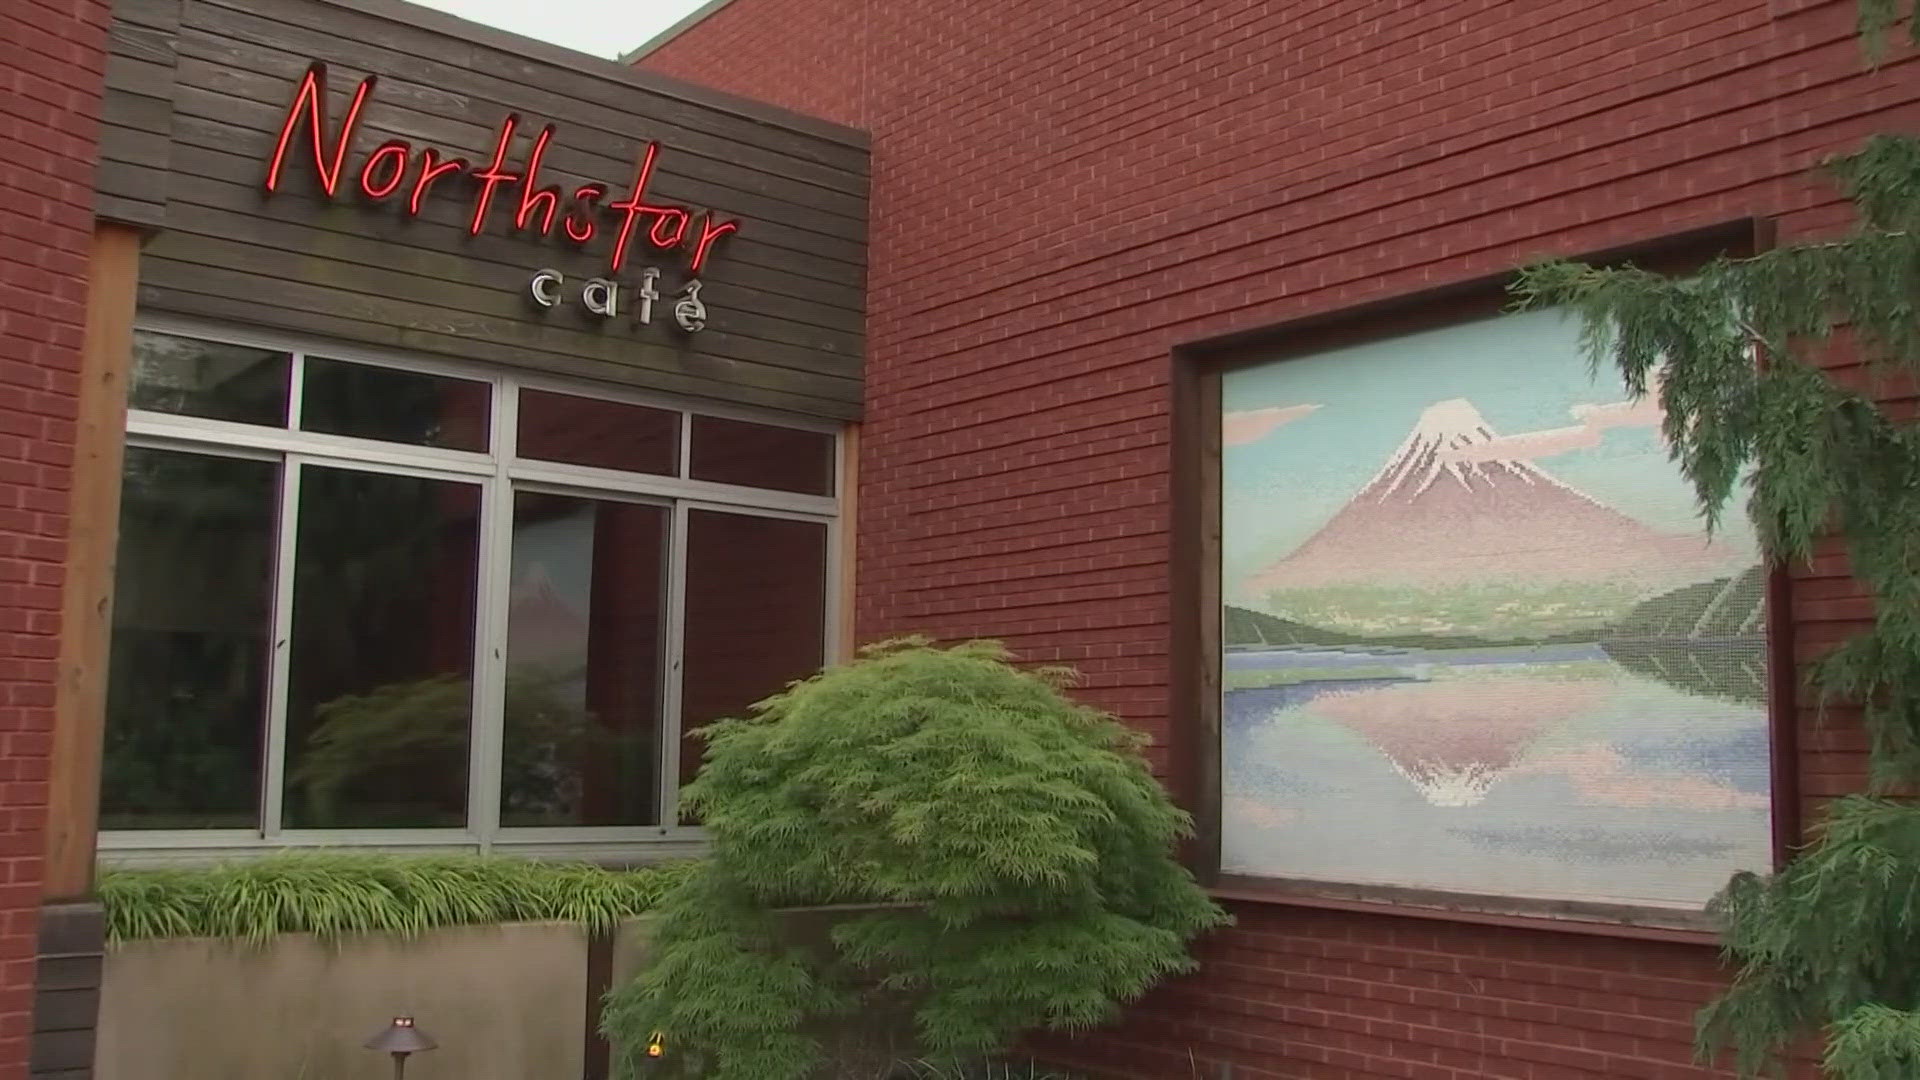 The mosaic was the focal point of Westerville's famous Kyoto Tea House built by George Henderson in the late 1950s.